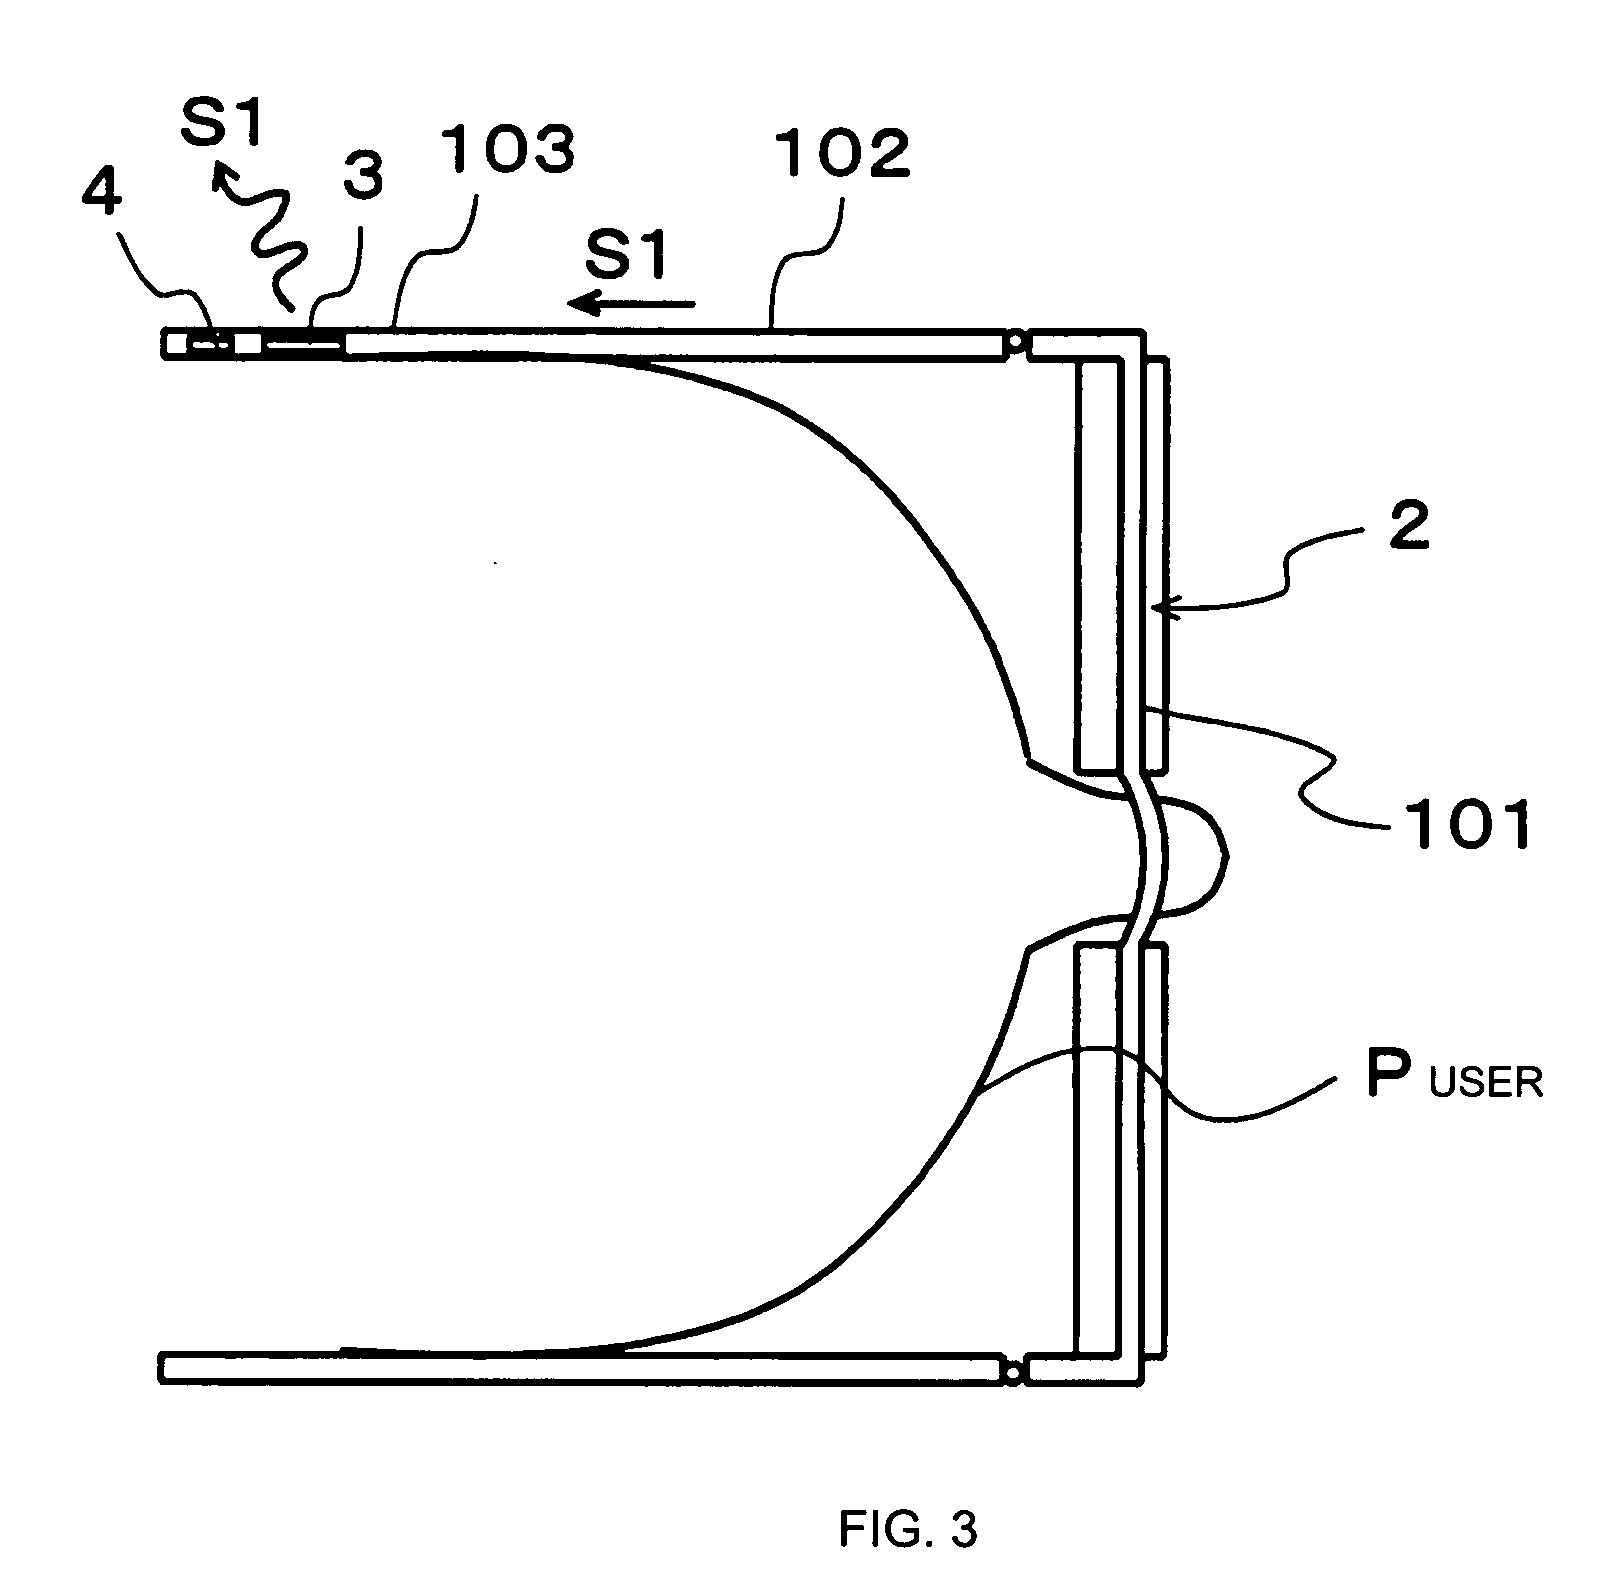 Eyeglass interface device and security system